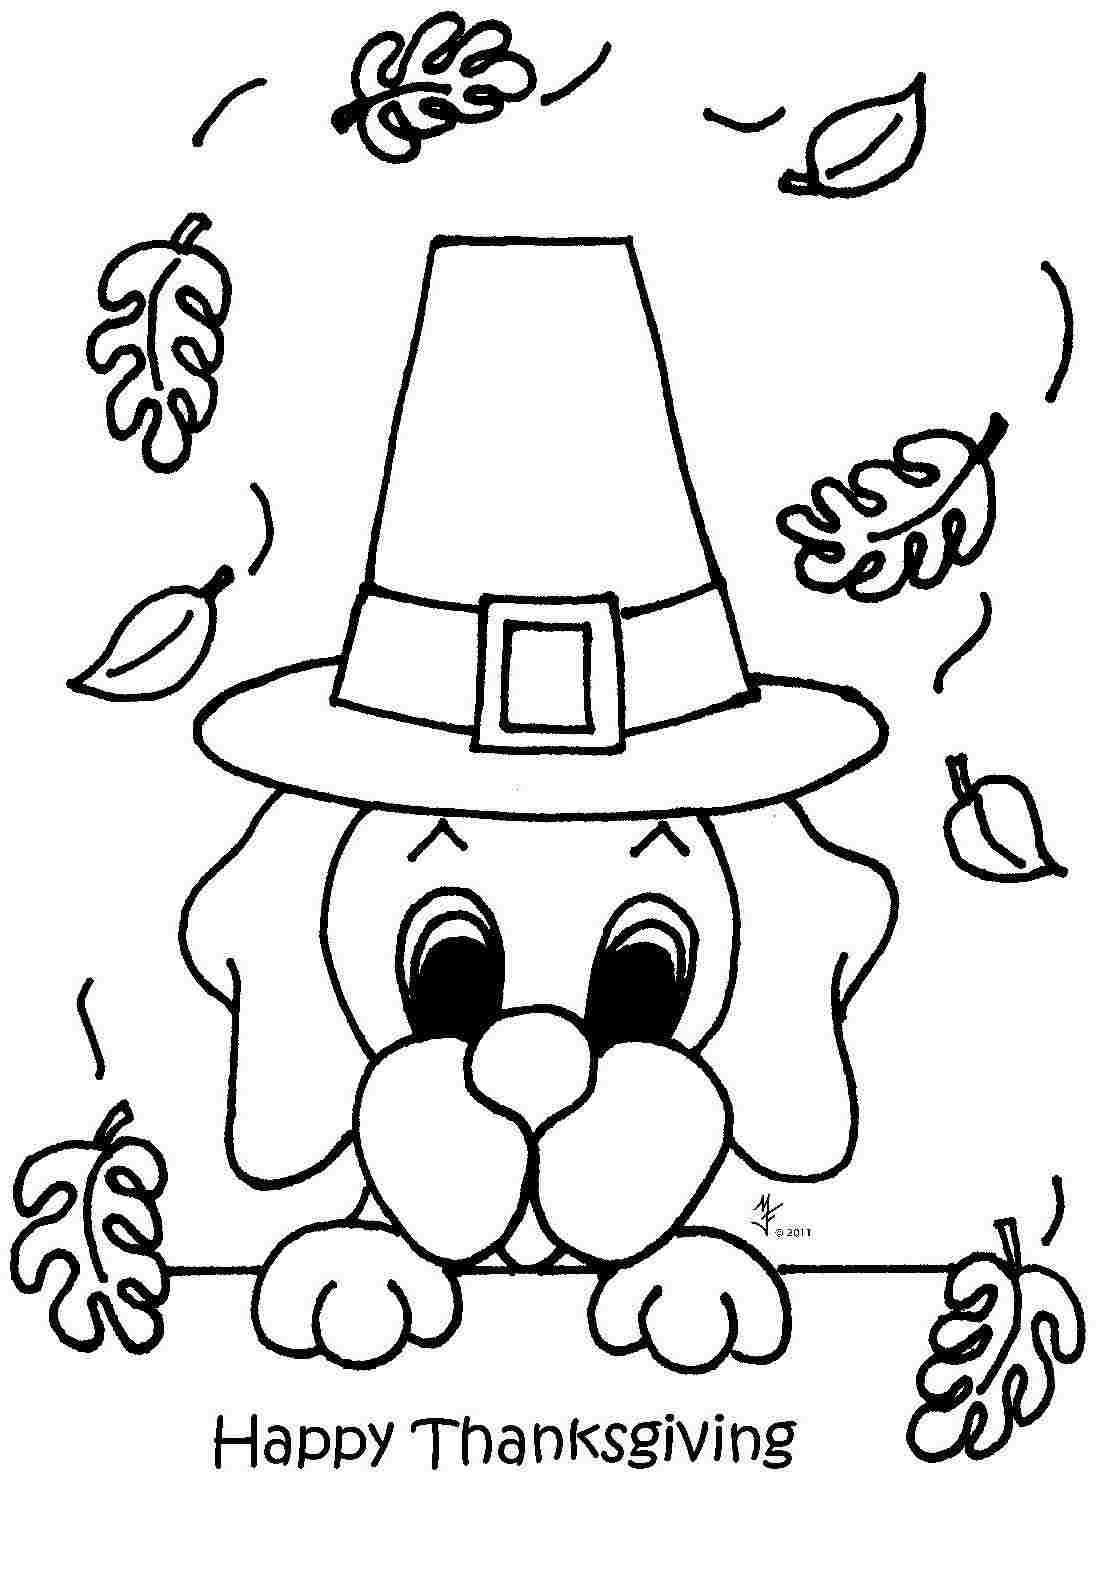 Happy Thanksgiving Cute Dog Coloring Page